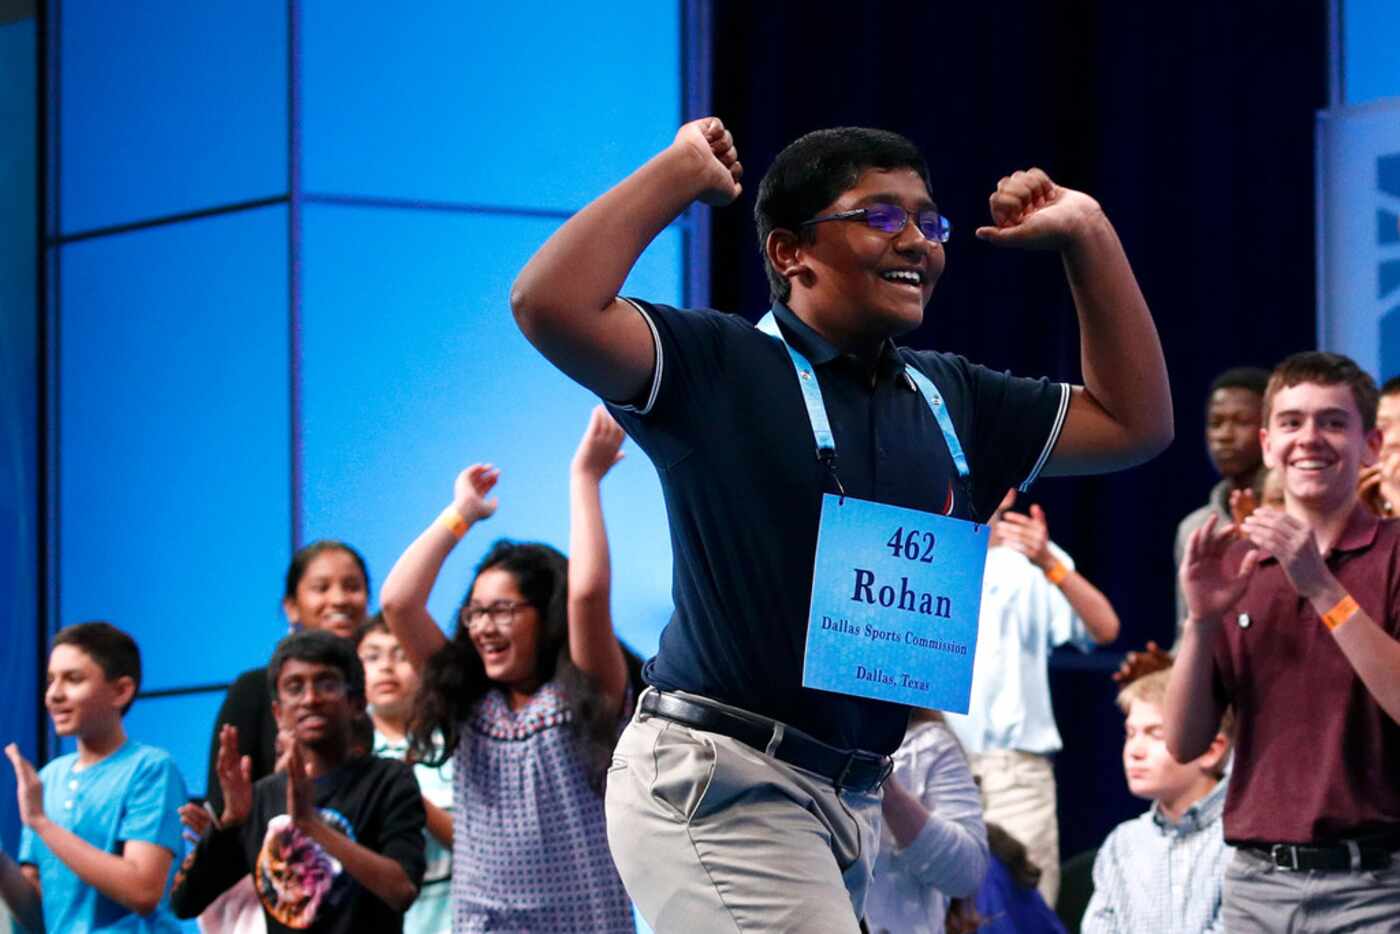 Rohan Raja, 13, of Irving has enjoyed the limelight most of any of his co-champions: "I like...